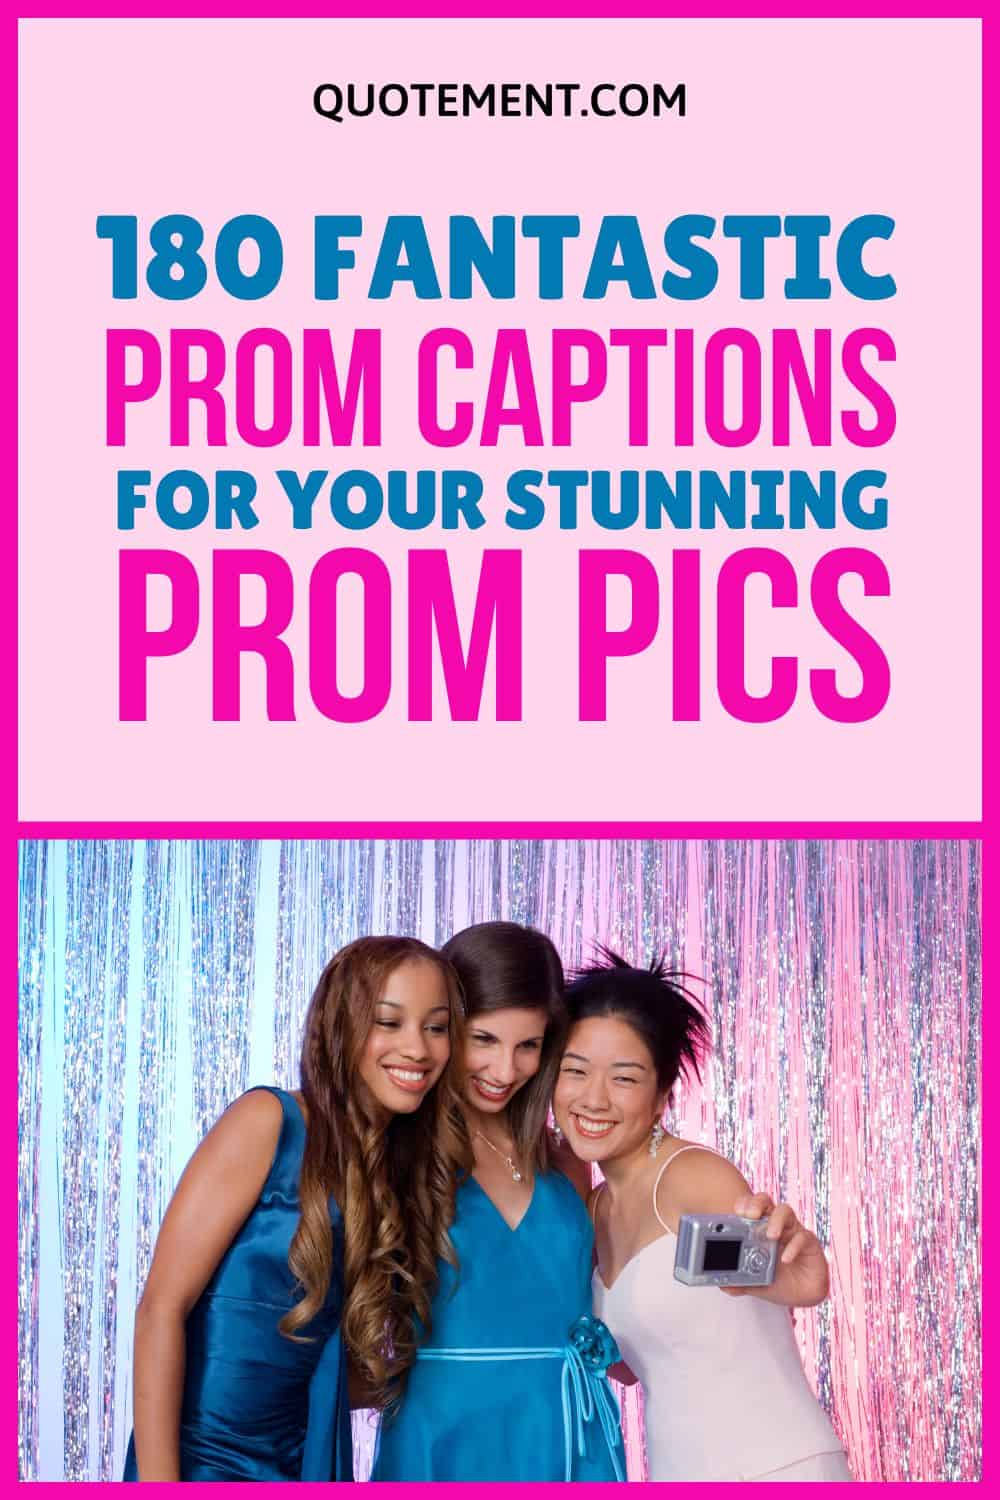 180 Fantastic Prom Captions For Your Stunning Prom Pics